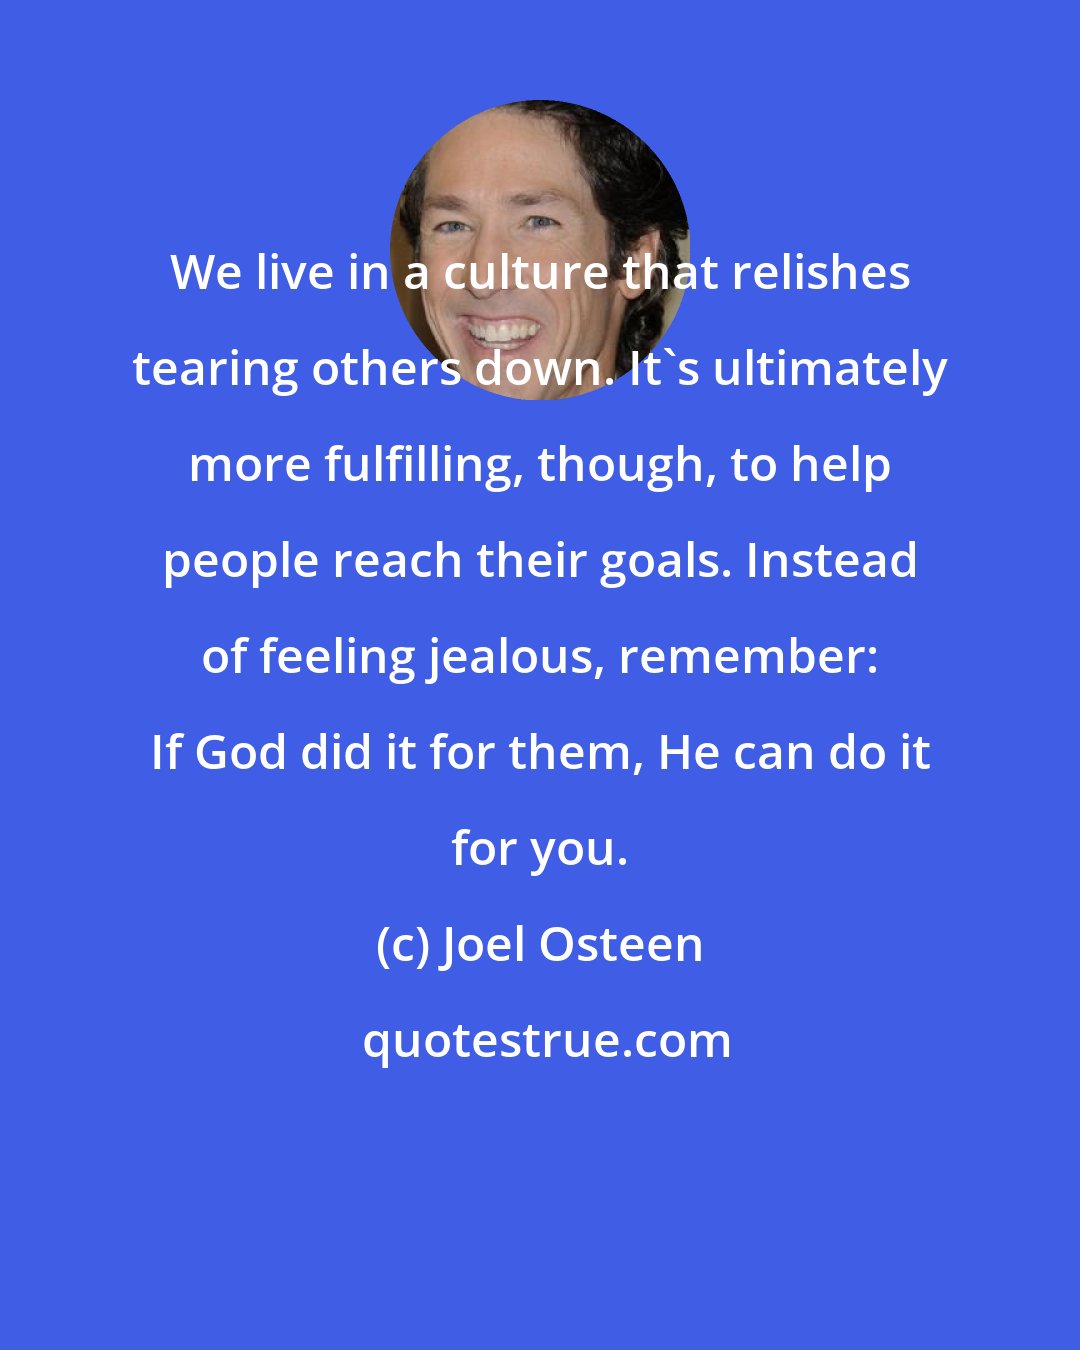 Joel Osteen: We live in a culture that relishes tearing others down. It's ultimately more fulfilling, though, to help people reach their goals. Instead of feeling jealous, remember: If God did it for them, He can do it for you.